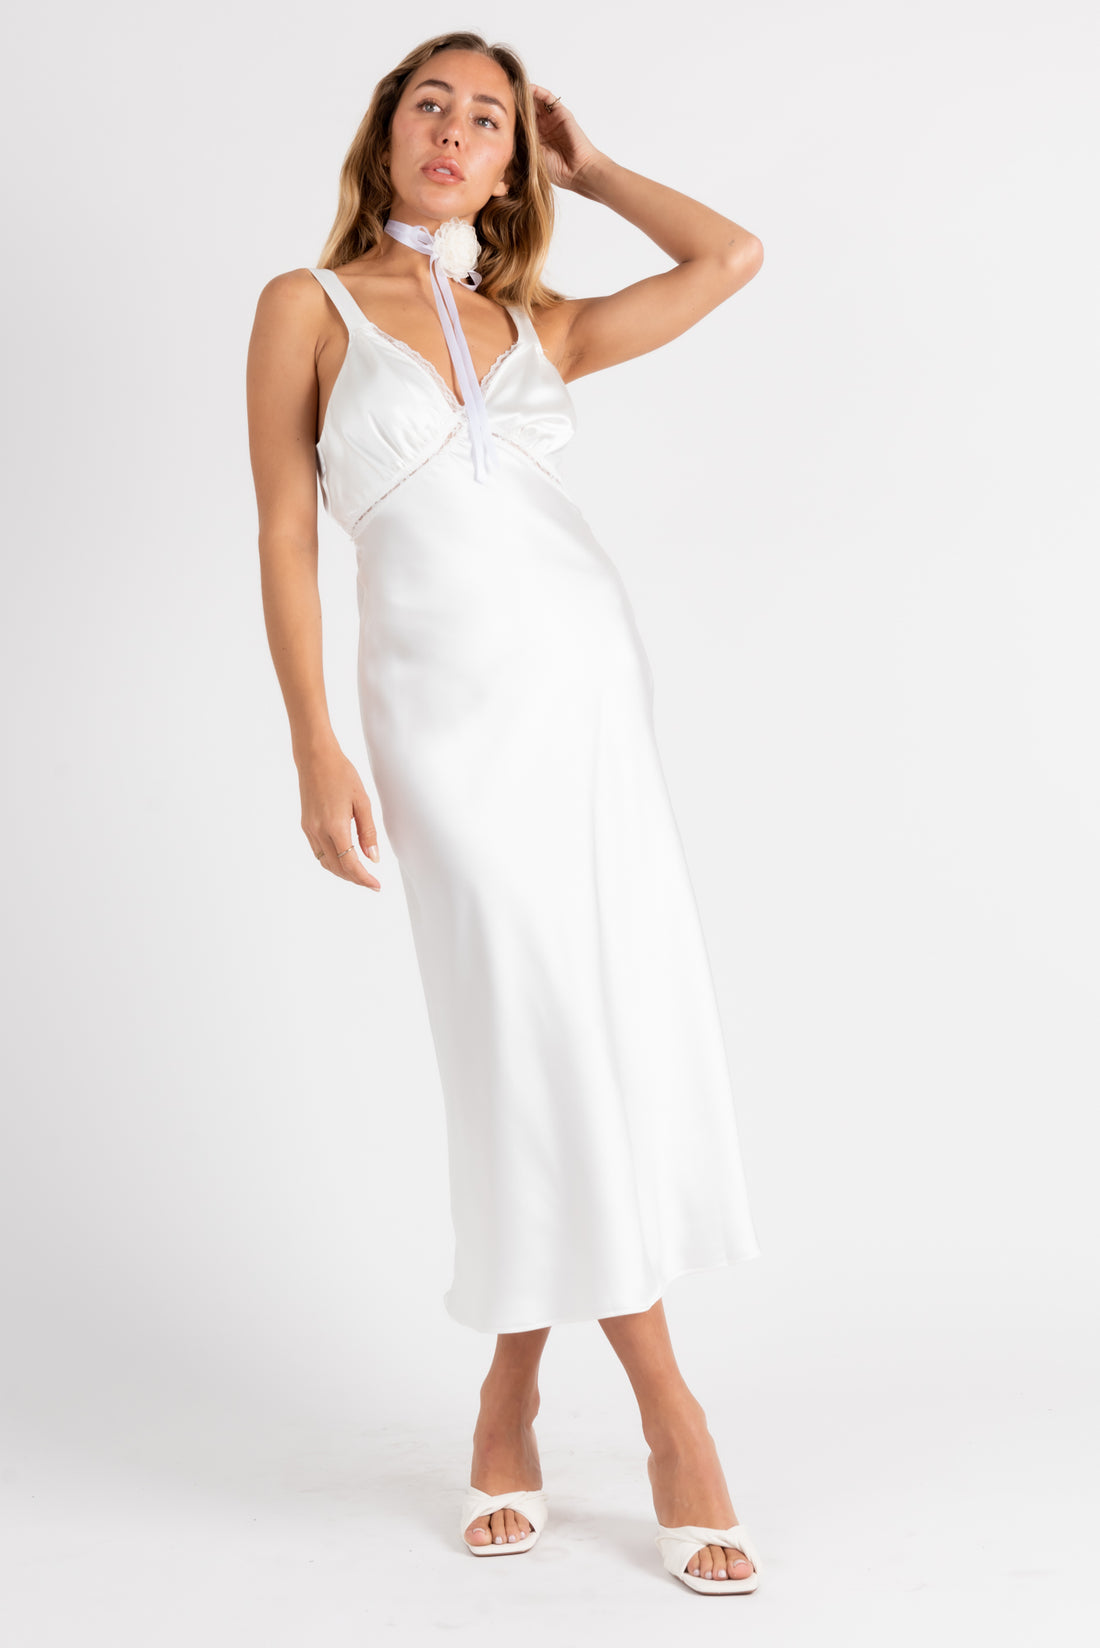 Ethereal Satin Slip Dress With Lace